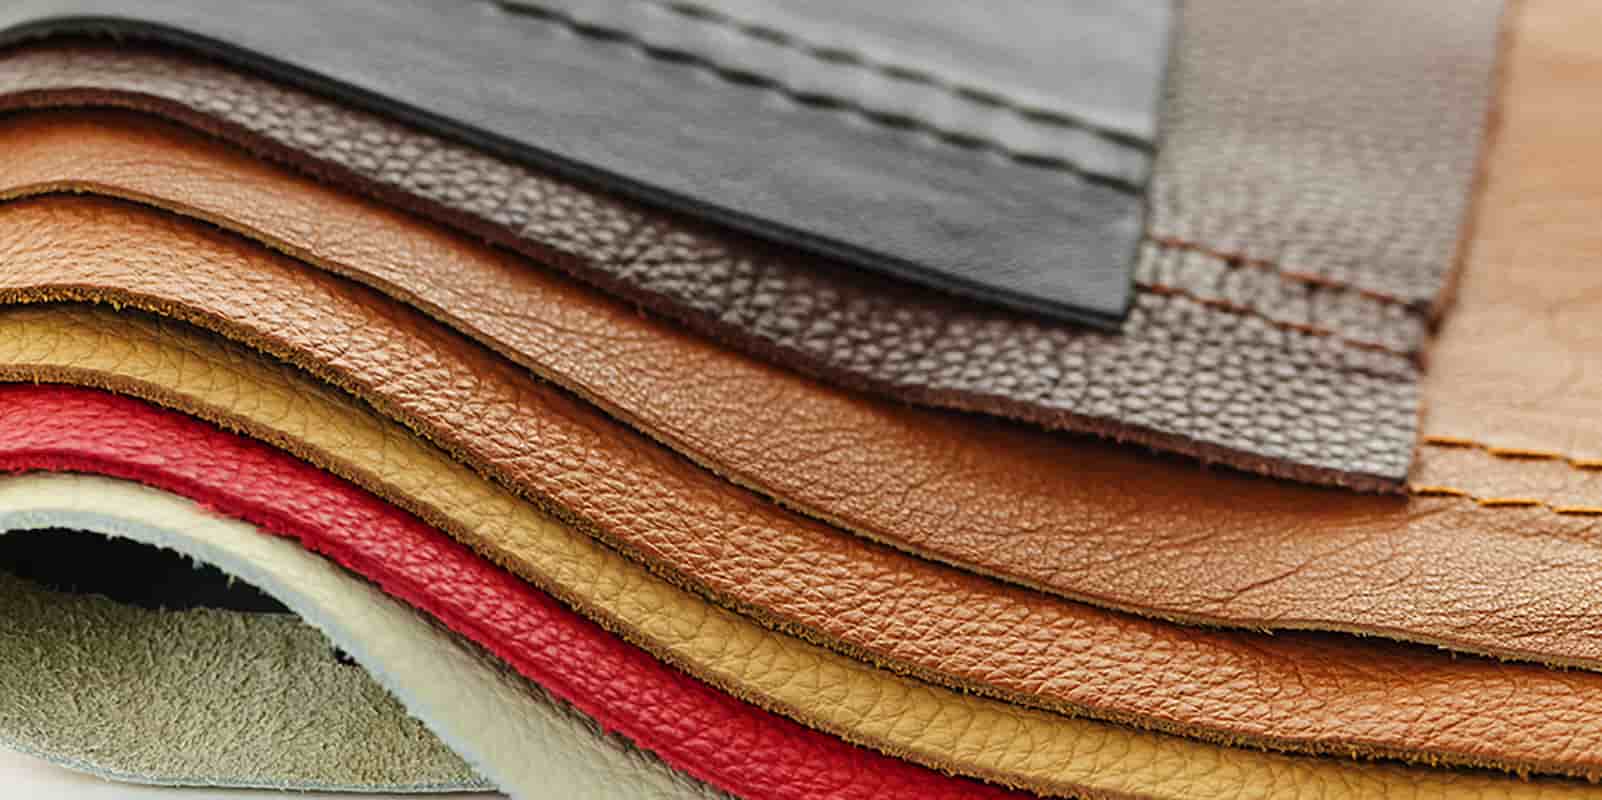 microfiber leather vs cowhide leather